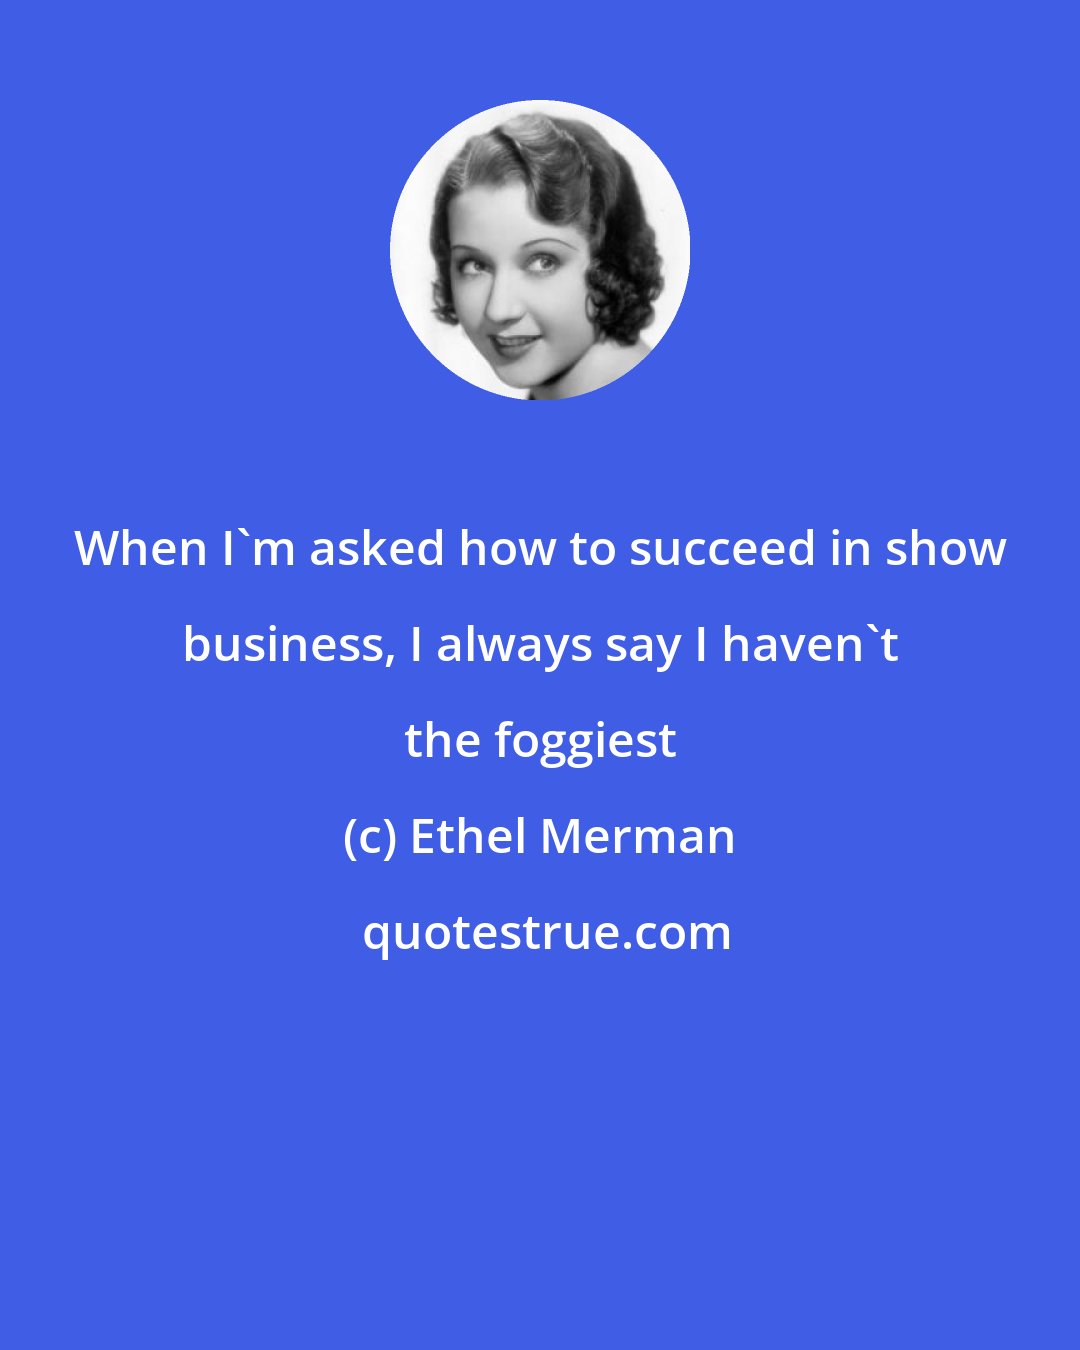 Ethel Merman: When I'm asked how to succeed in show business, I always say I haven't the foggiest